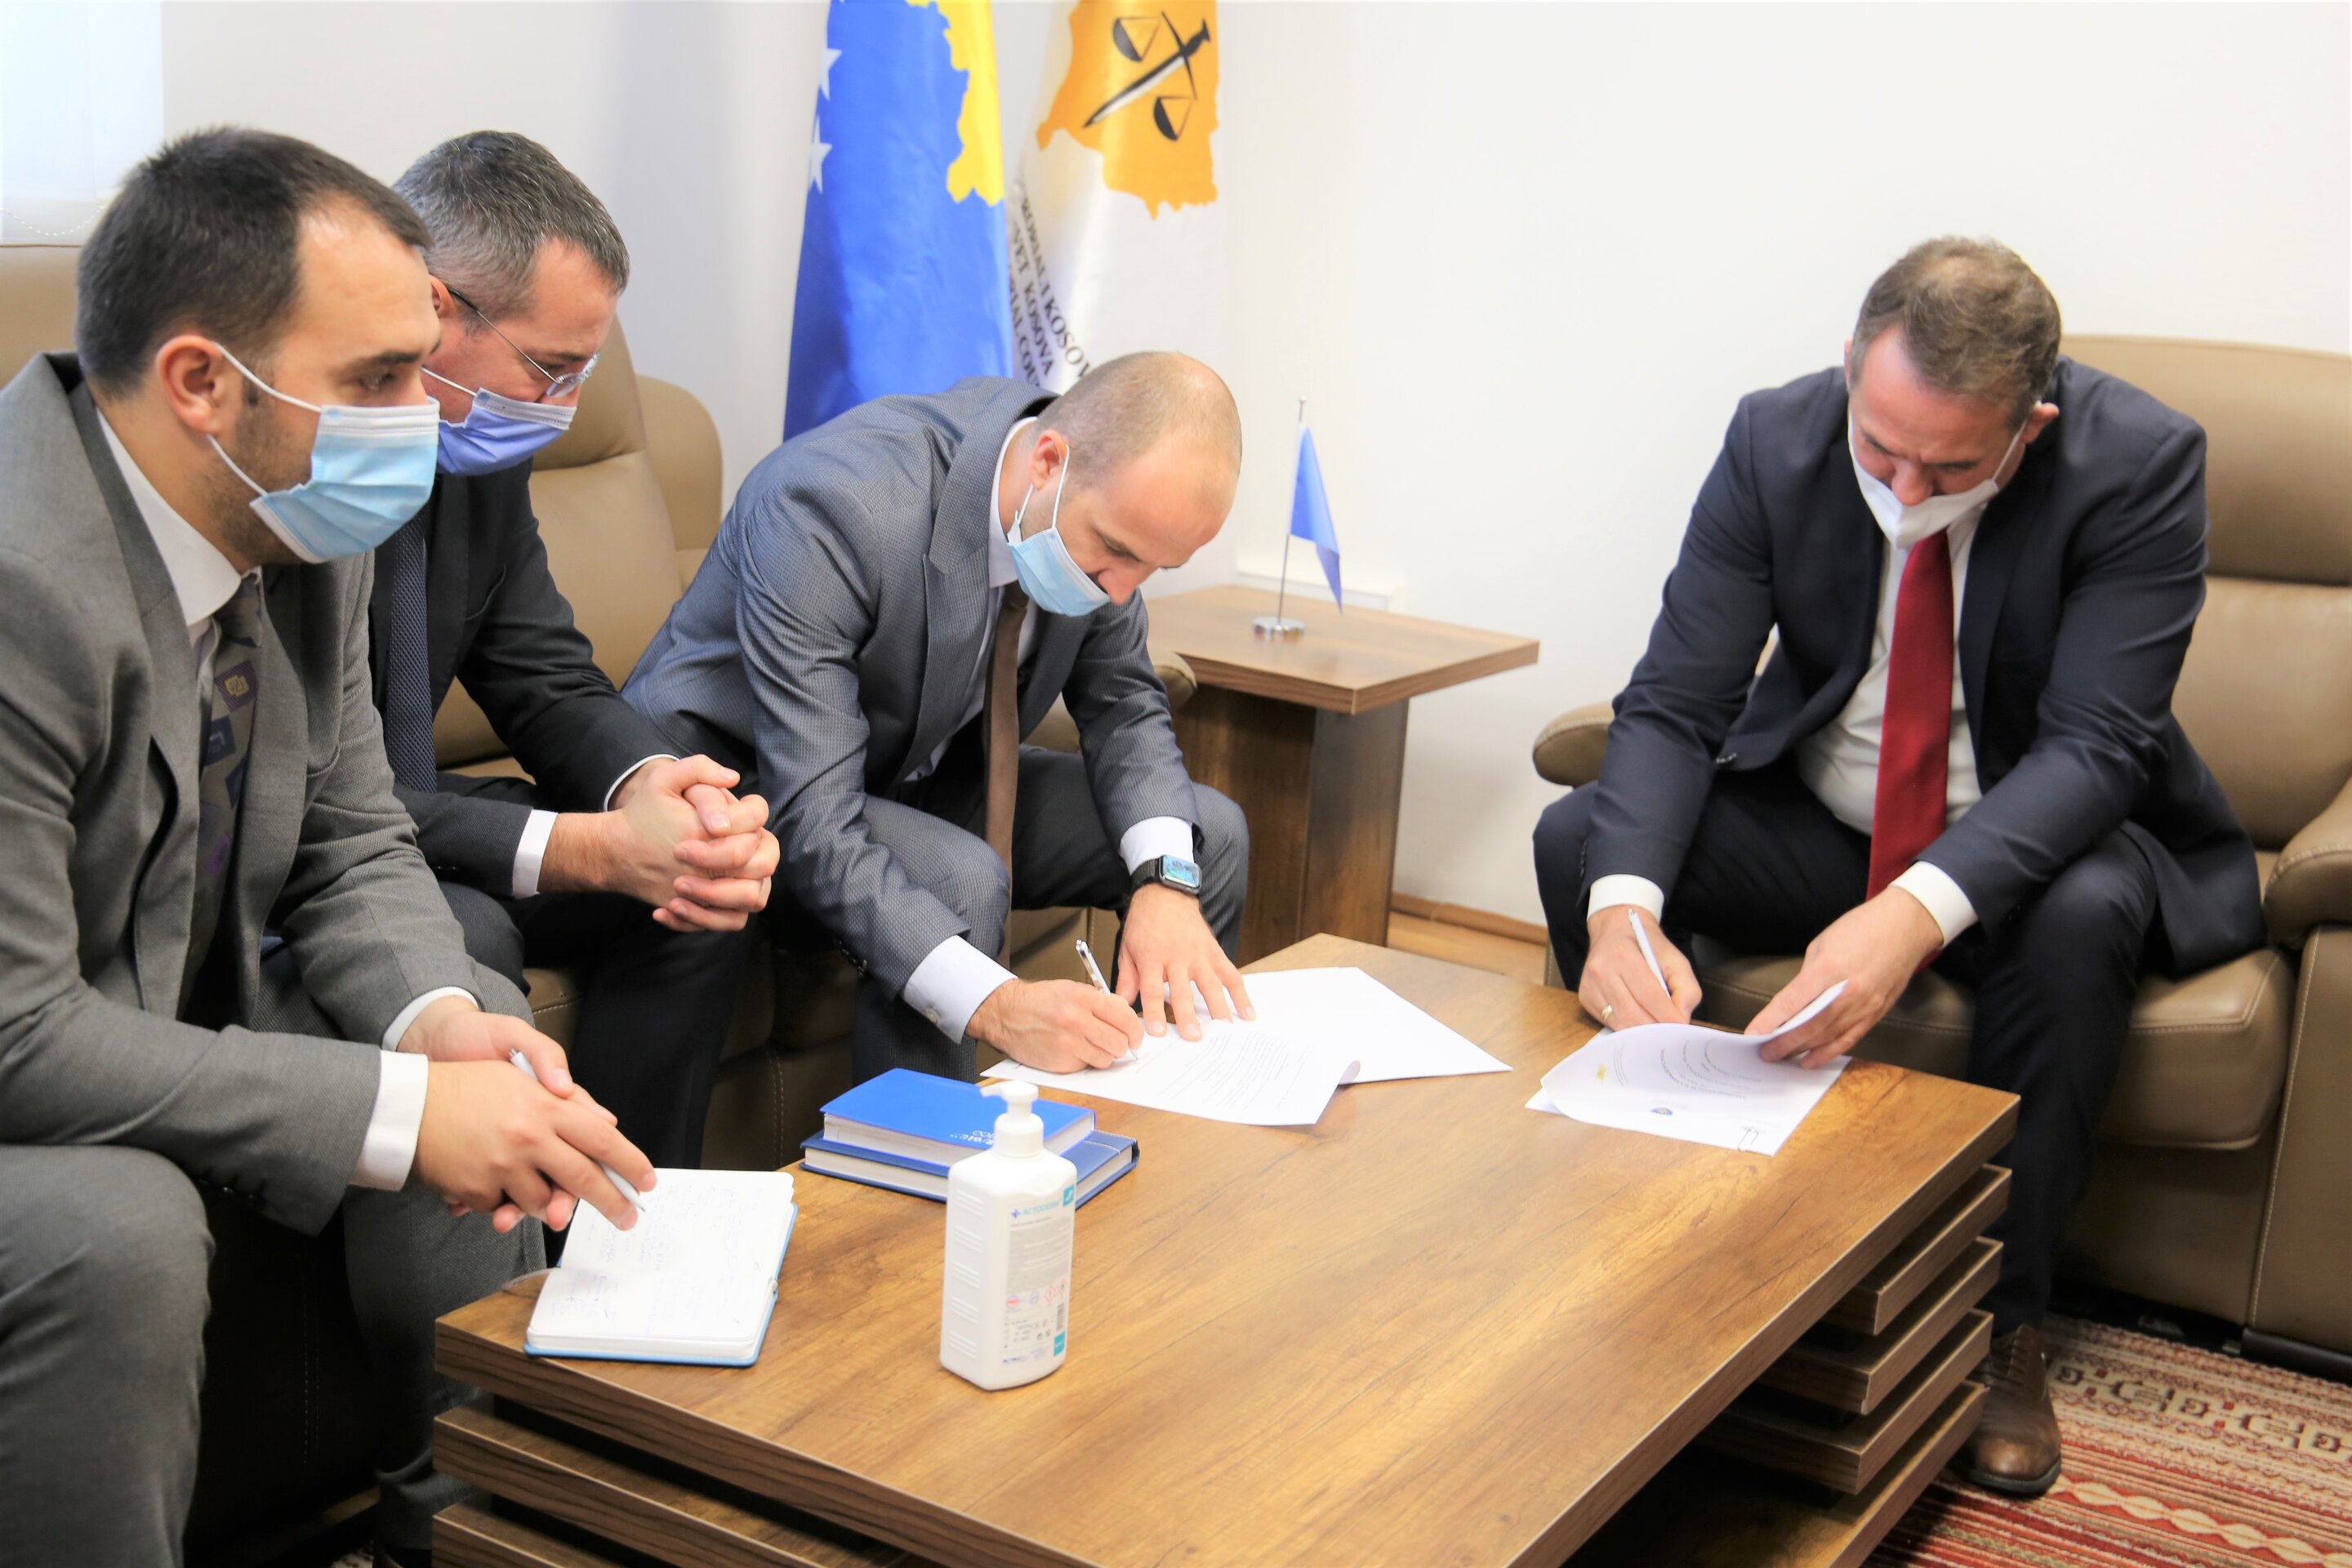 A memorandum of cooperation is signed between KPC and KCA